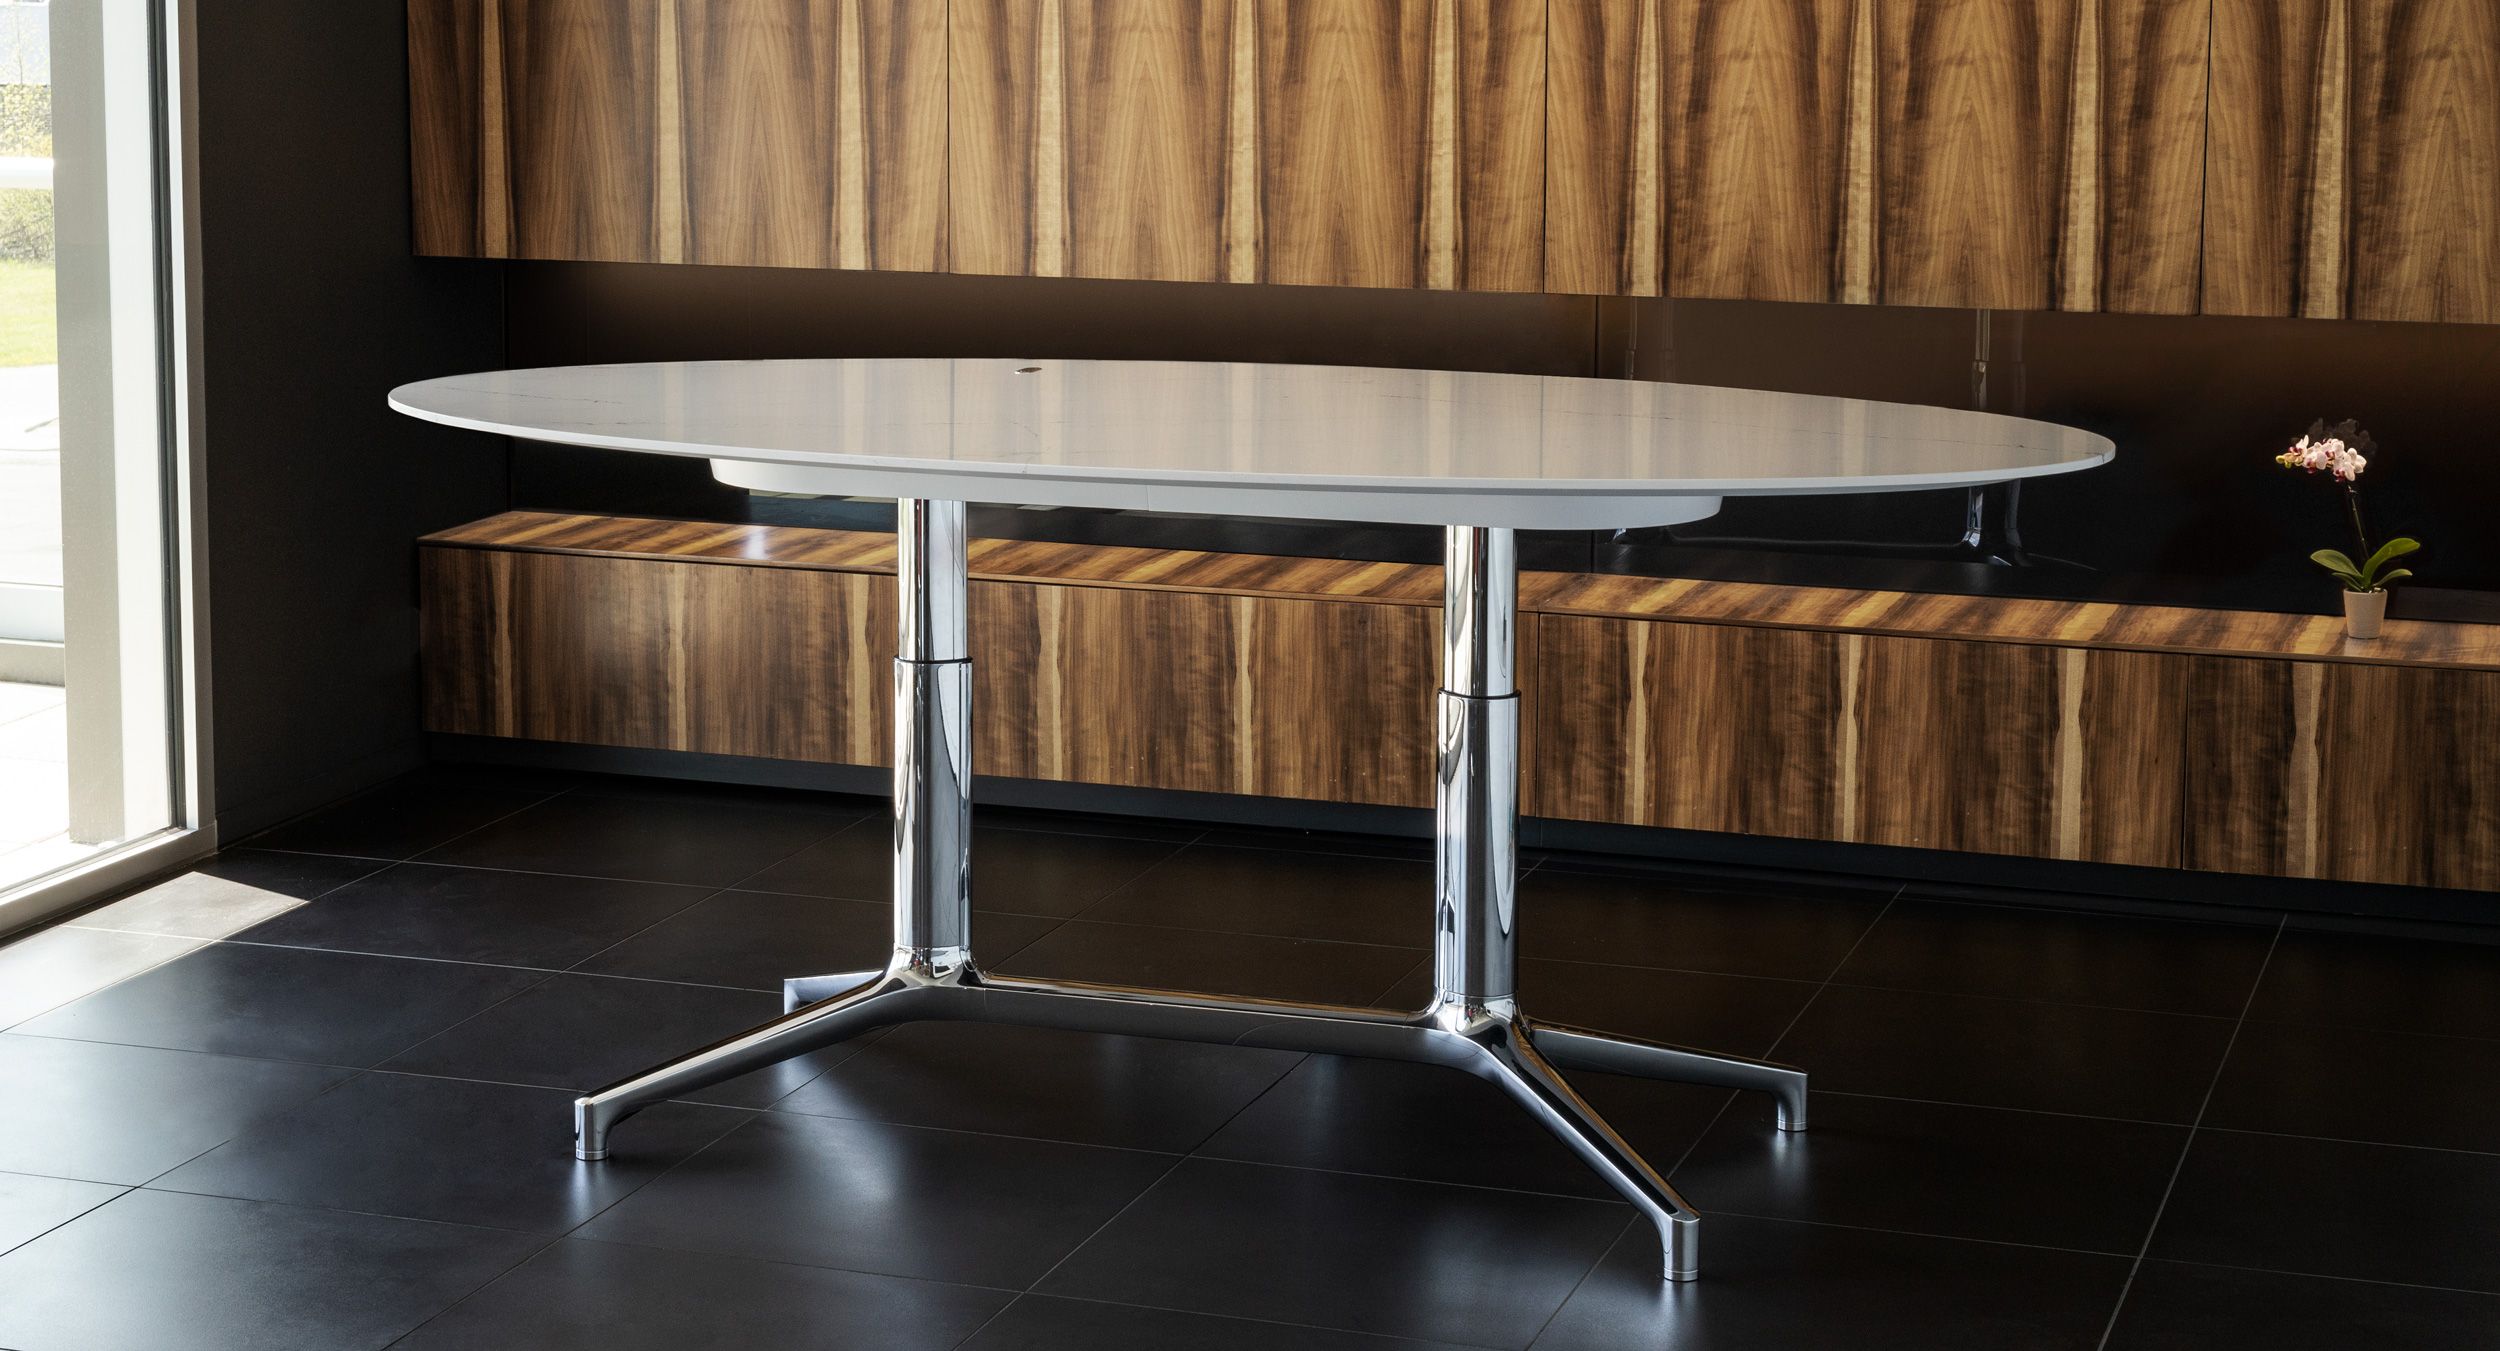 Adjustable-height ergonomics are integrated into a beautifully sculpted, timeless metal base.